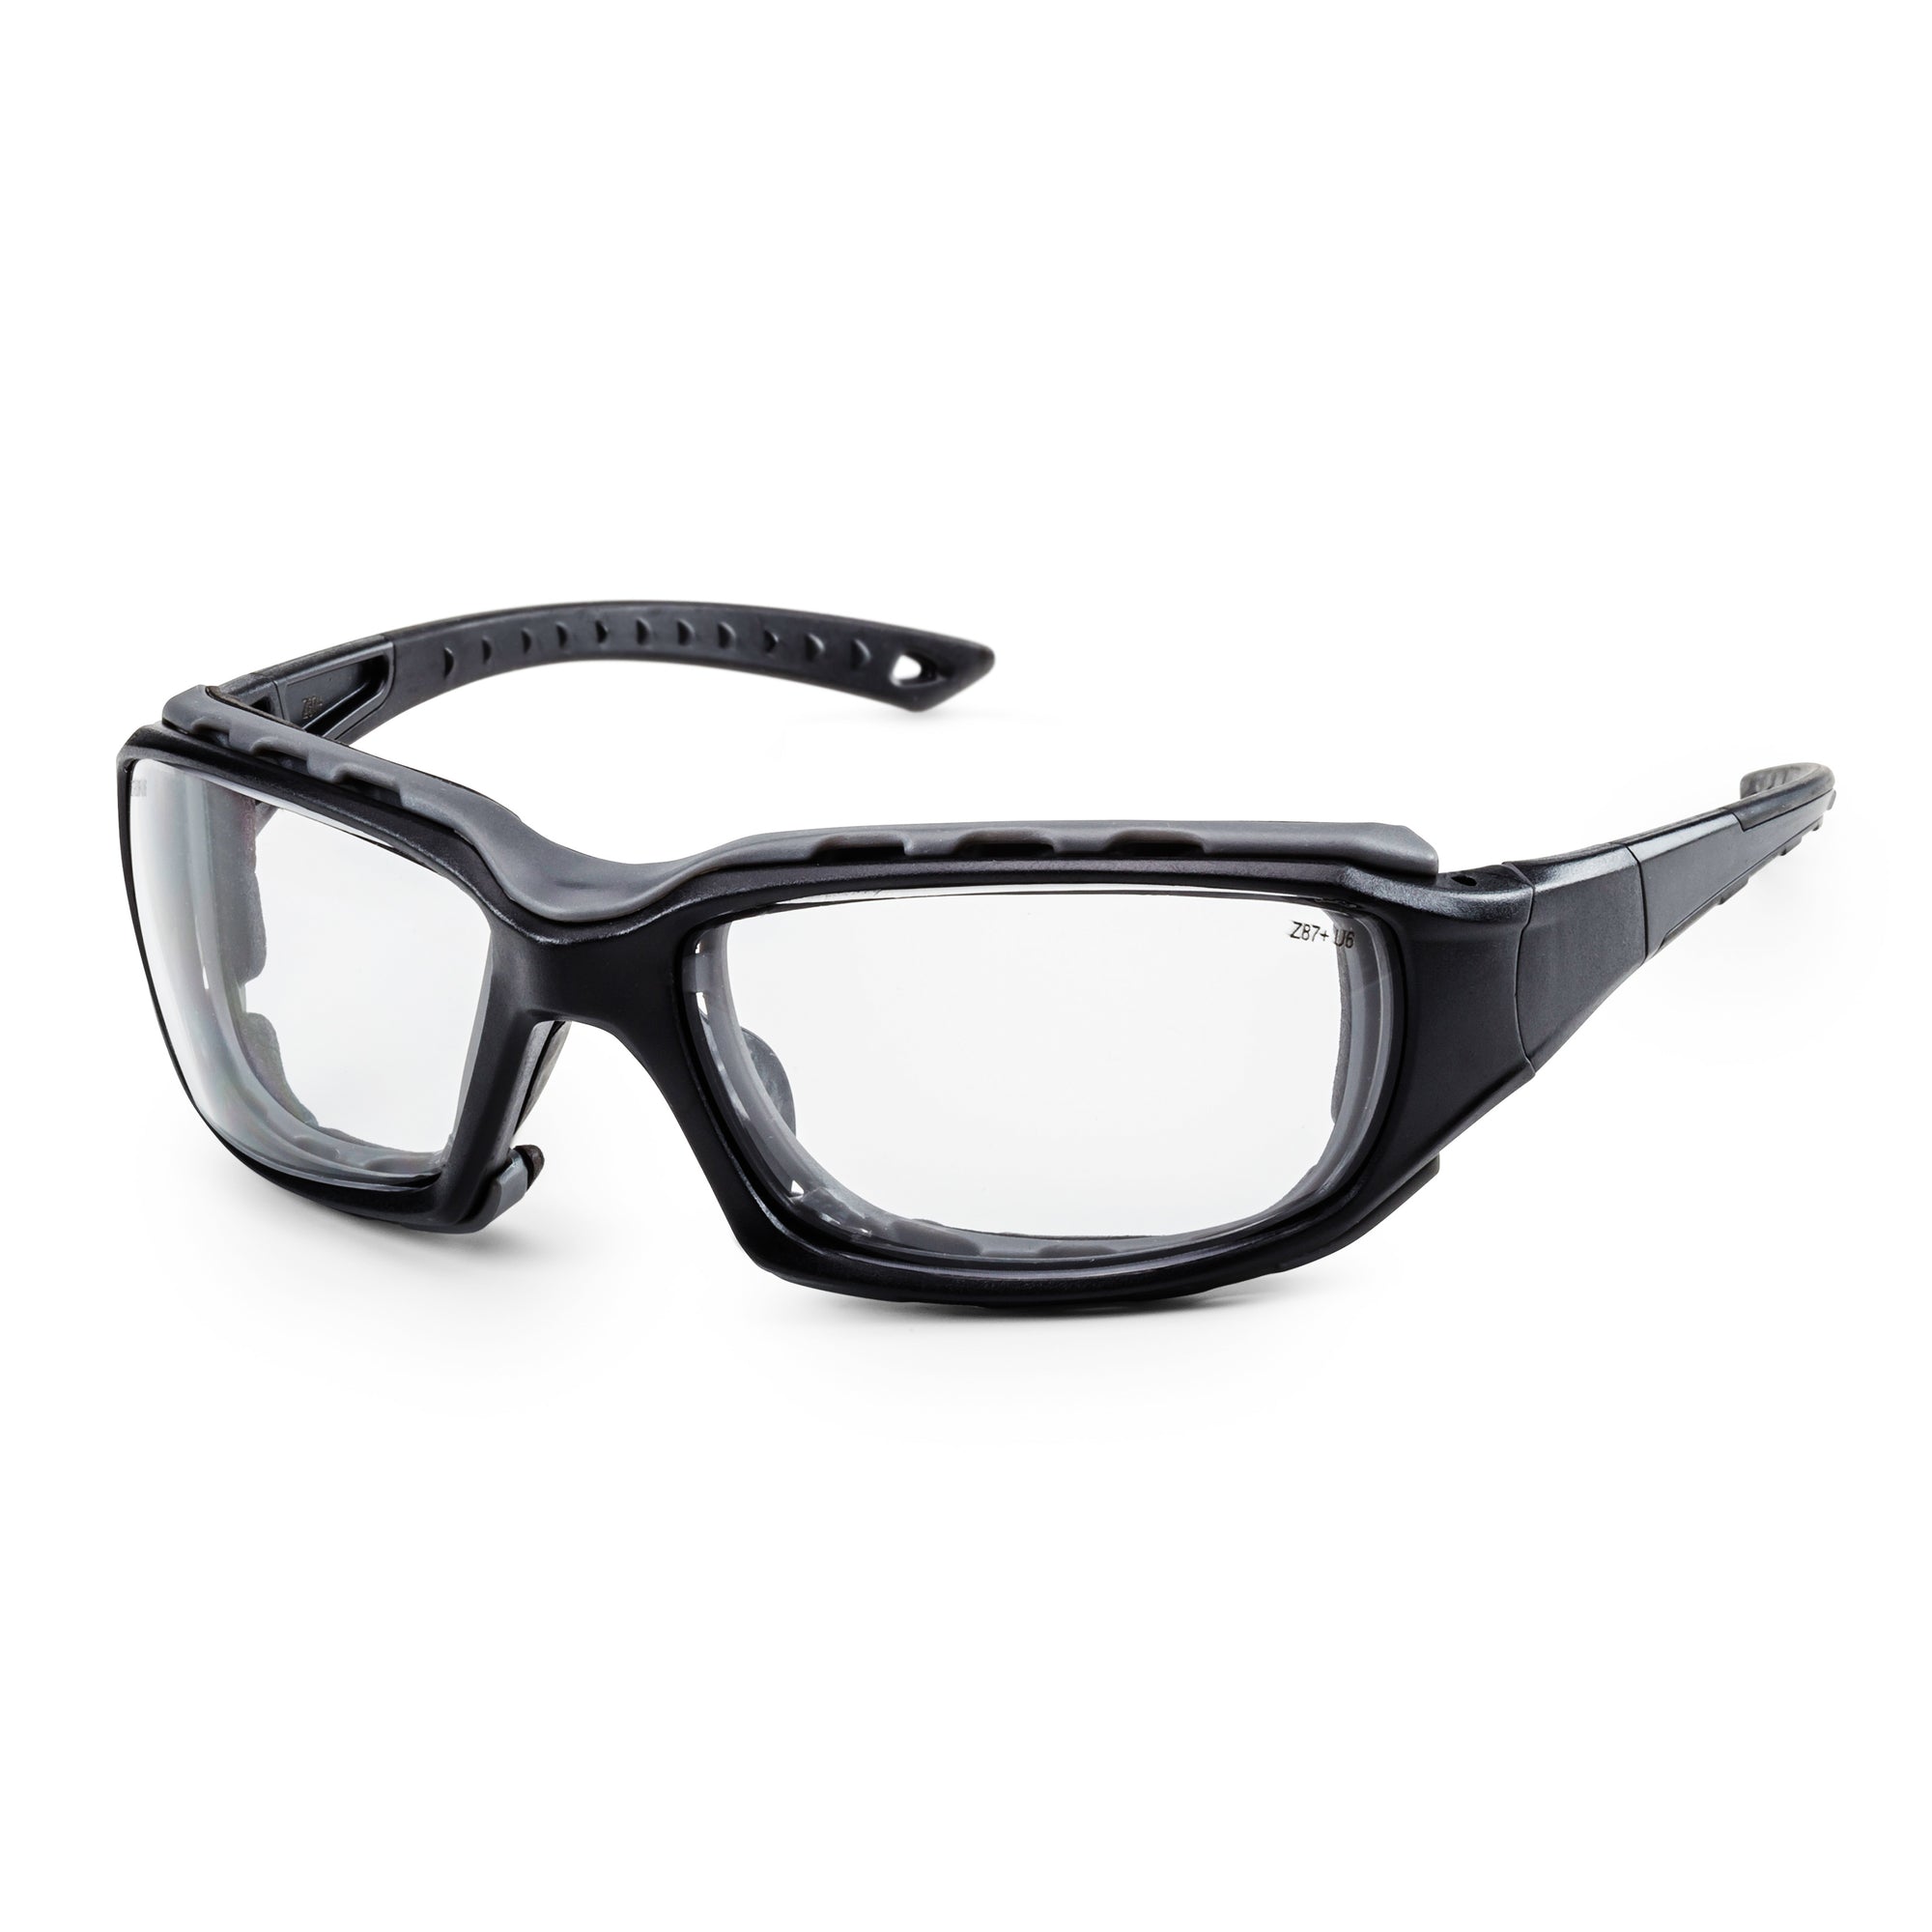 SolidWork SW8323 premium safety glasses for shooting